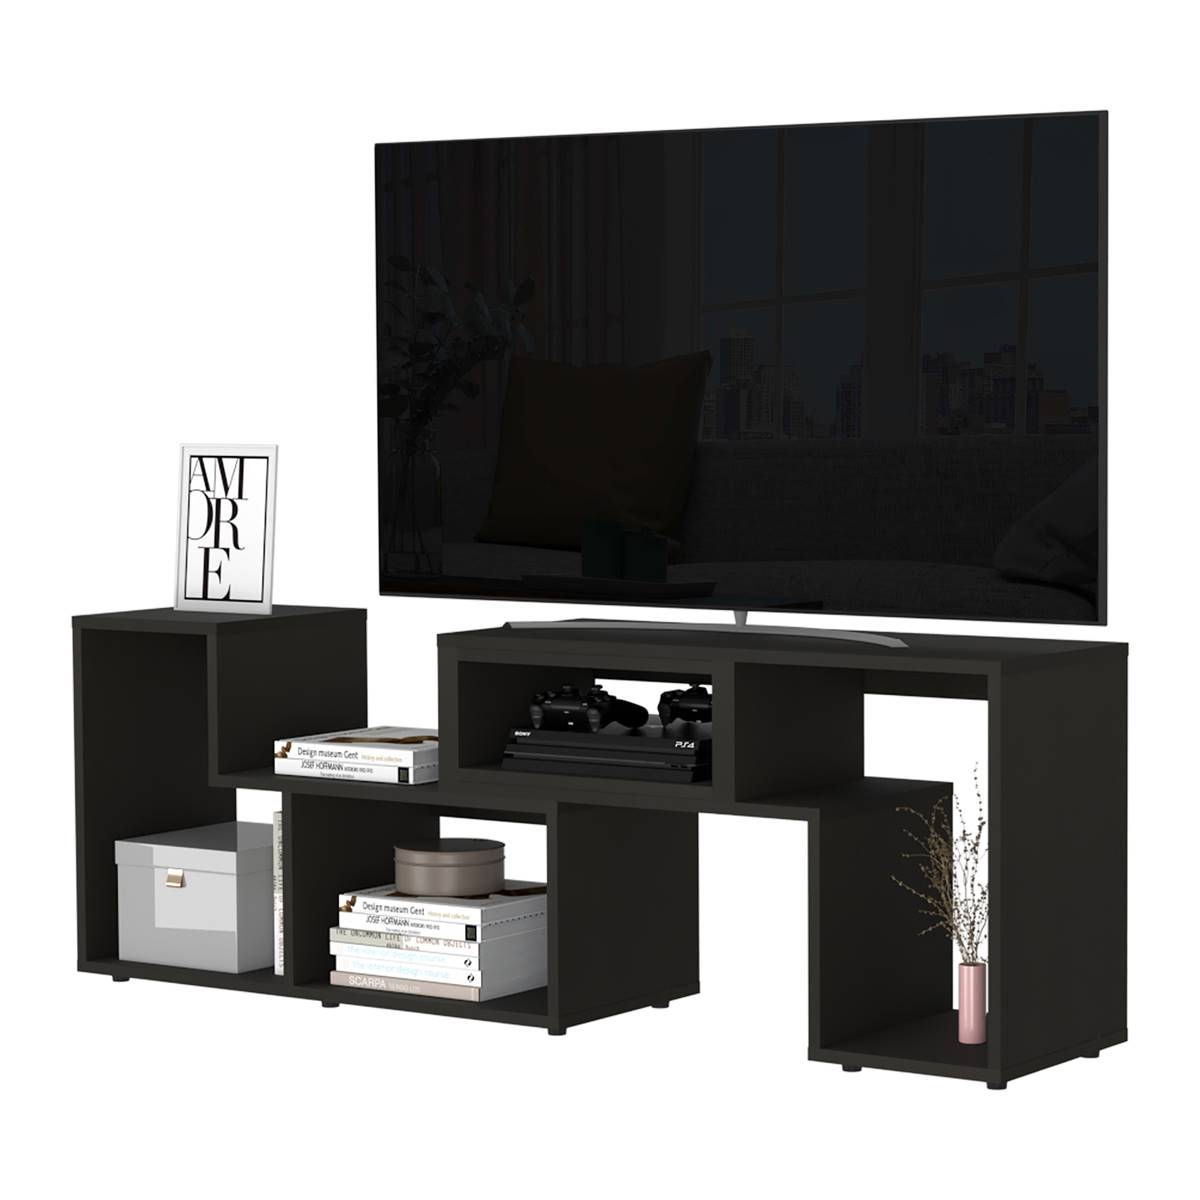 FM FURNITURE Harmony Extendable TV Stand